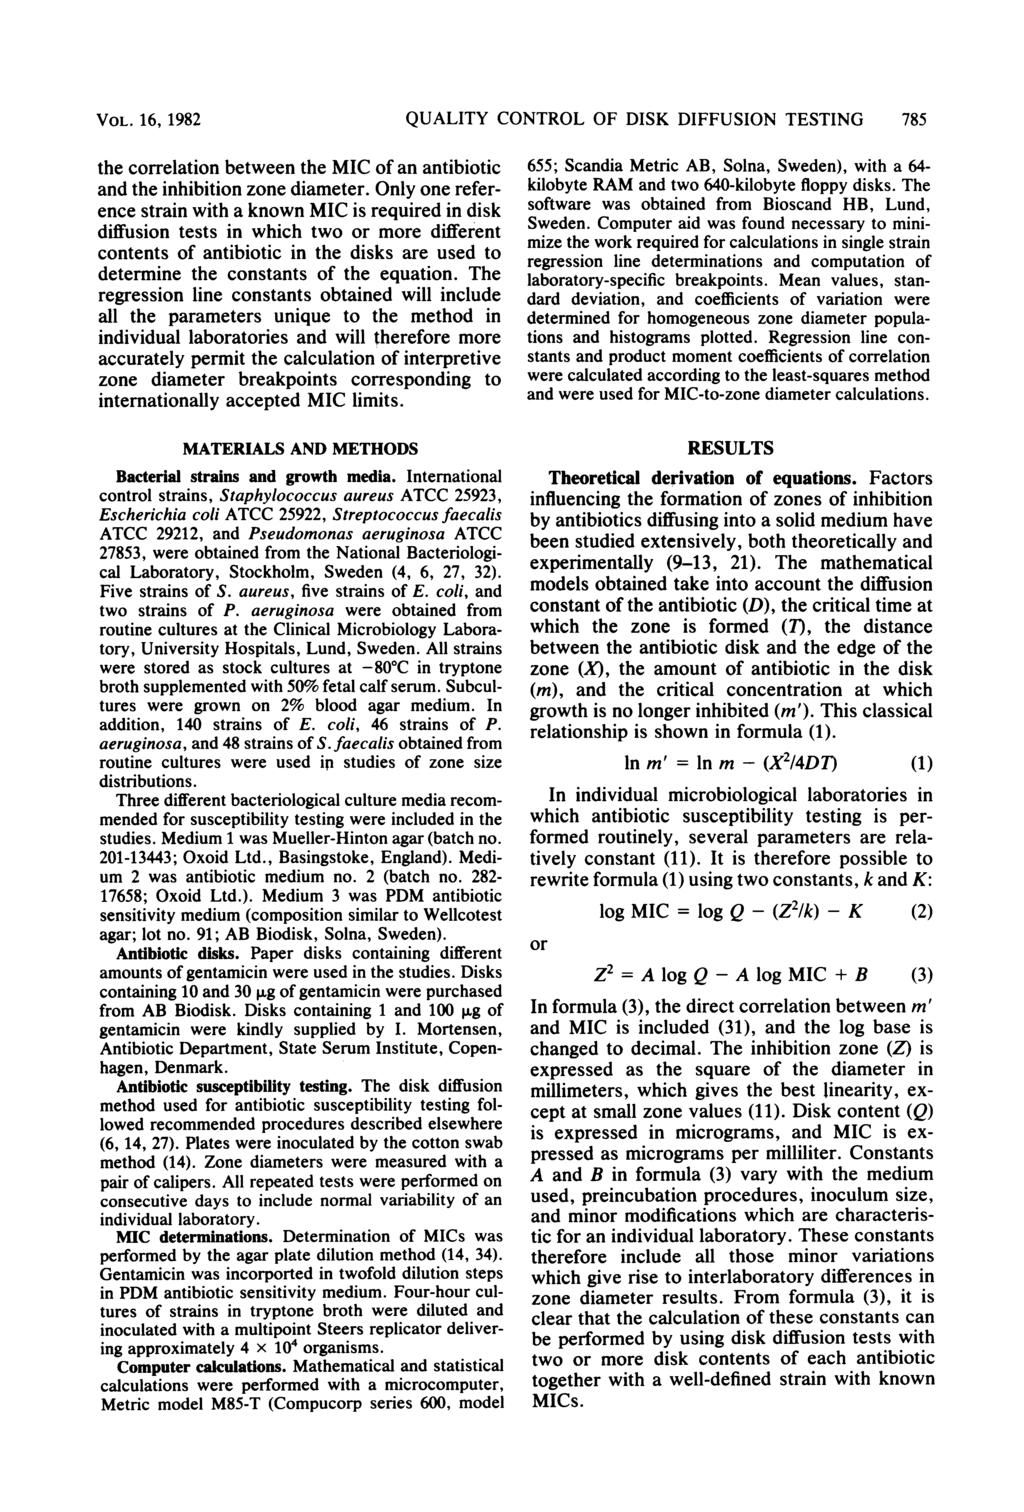 VOL. 16, 1982 QUALTY CONTROL OF DSK DFFUSON TESTNG 785 the correlation between the MC of an antibiotic and the inhibition zone diameter.